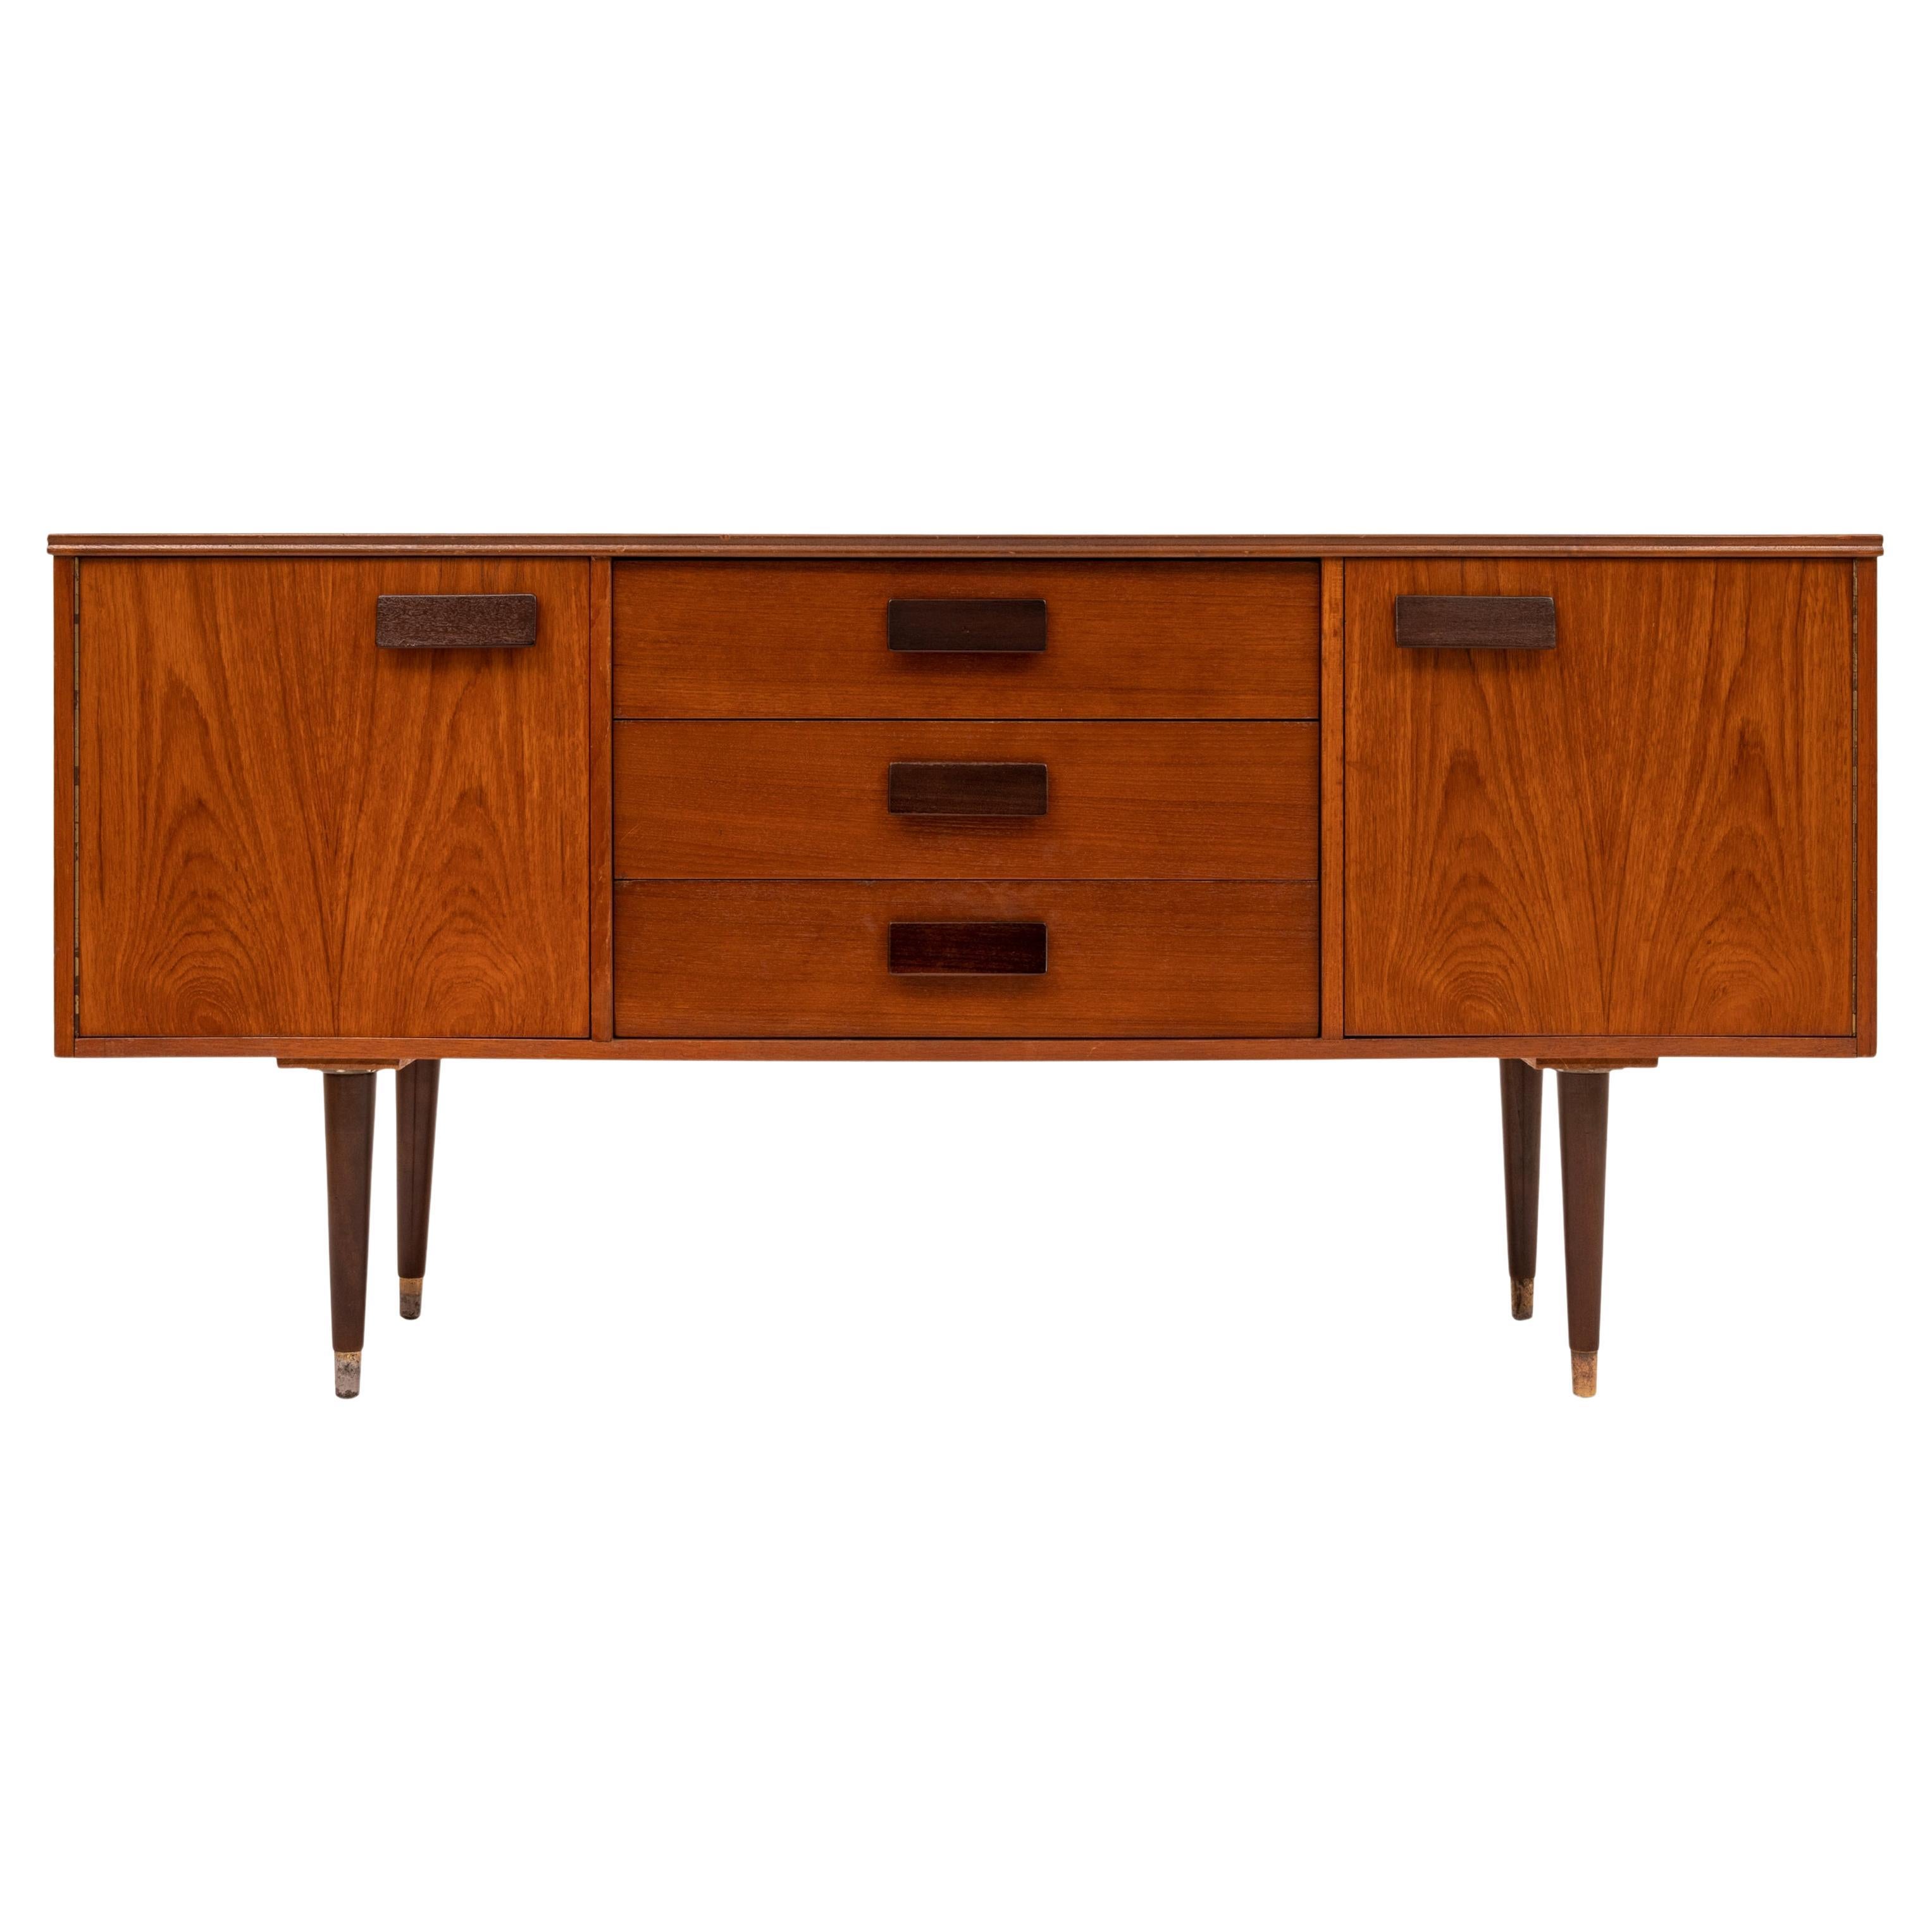 A good vintage Mid-Century Modern teak credenza/sideboard, 1960s.
The credenza of unusual compact and bijou Size and having twin cupboards at each end, the cupboard to the right side is fitted with a single shelf. To the middle is a bank of three